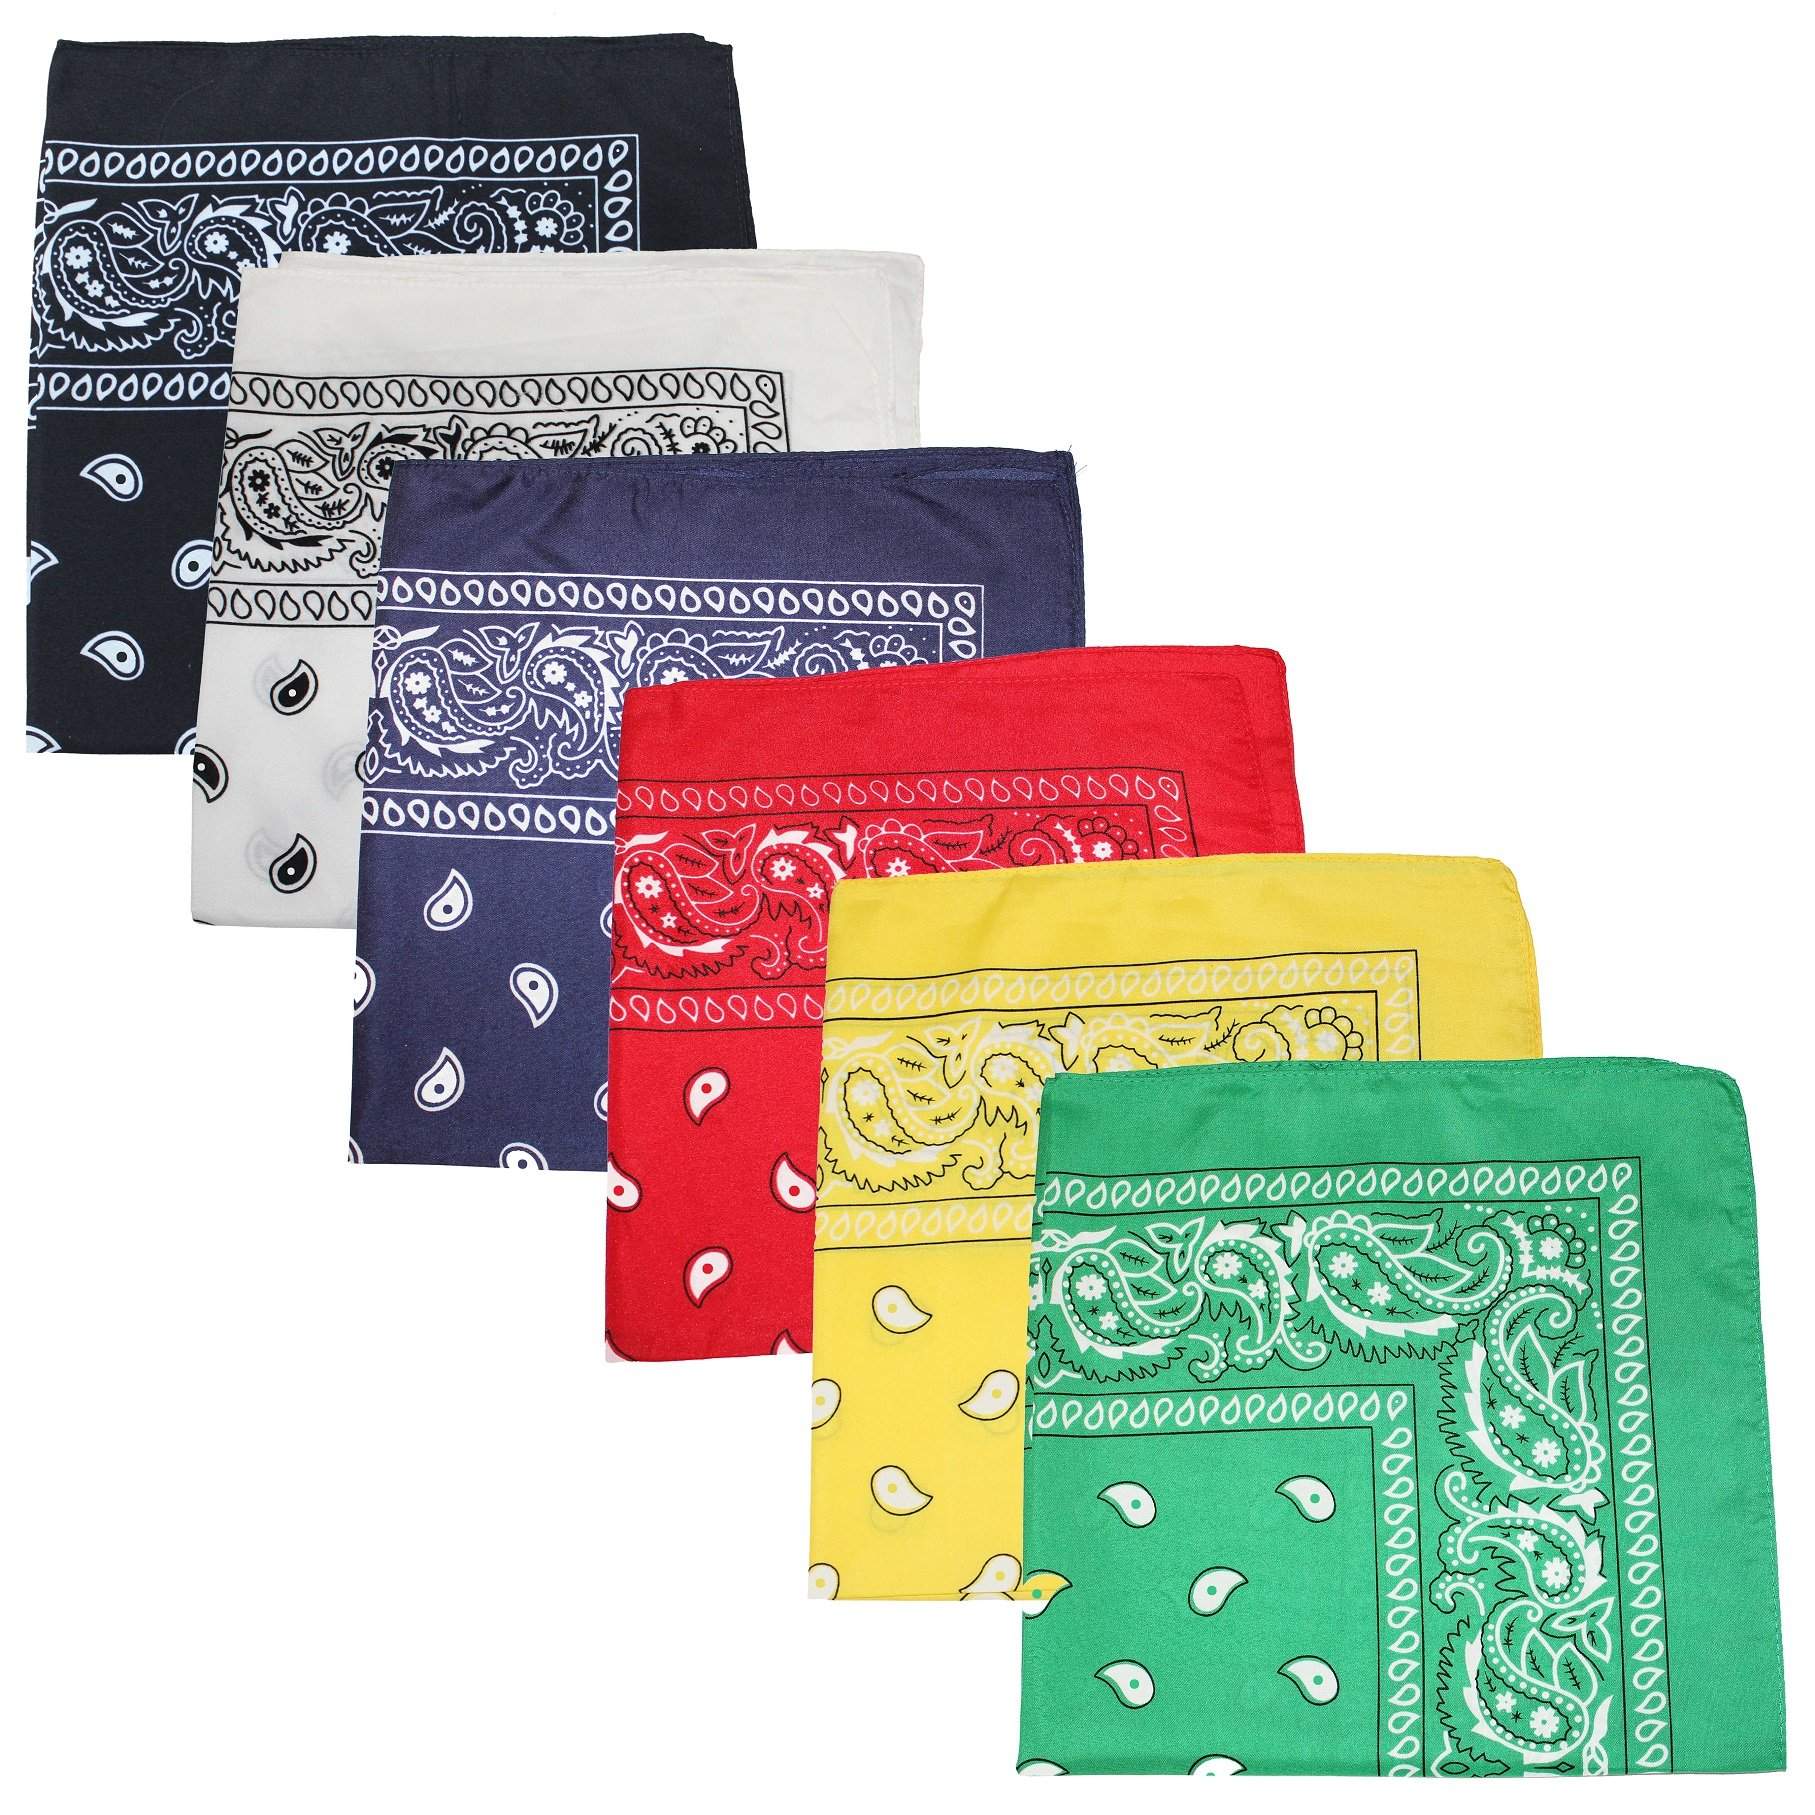 Qraftsy Polyester Paisley XL Bandanas 27 x 27 Inches / 68.58 x 68.58 cm - 12 Pack